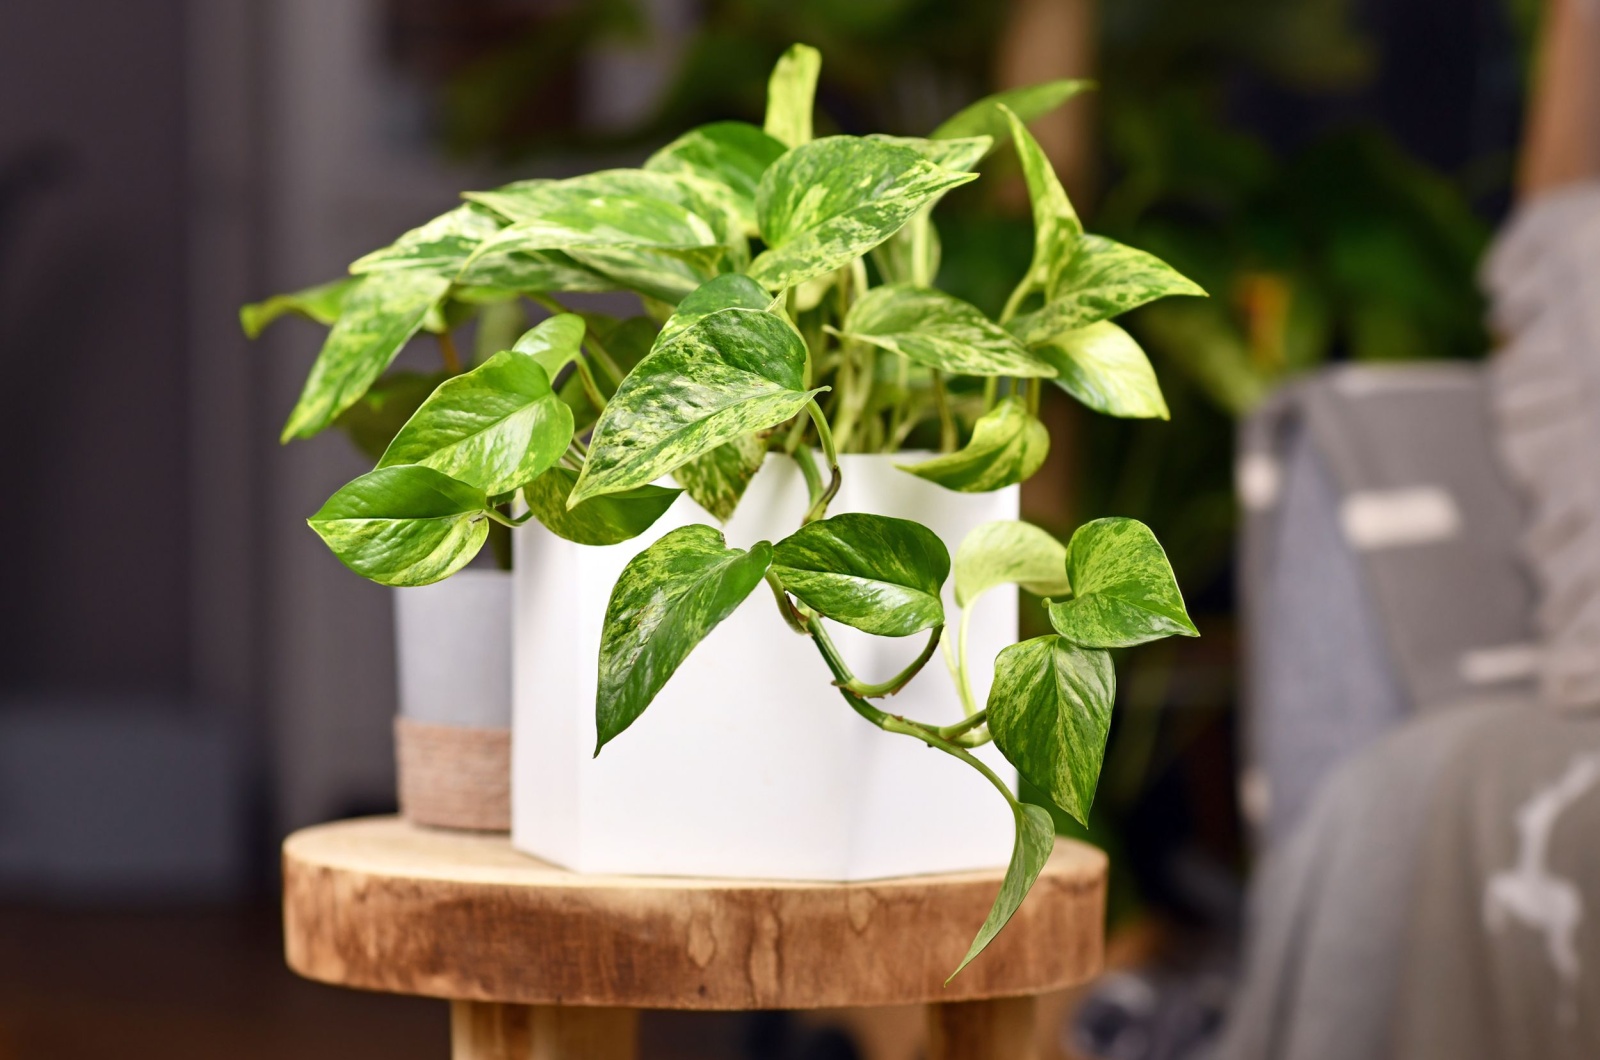 These 5 Rapid-Growing Plants Are Just Perfect For Quick House Decoration